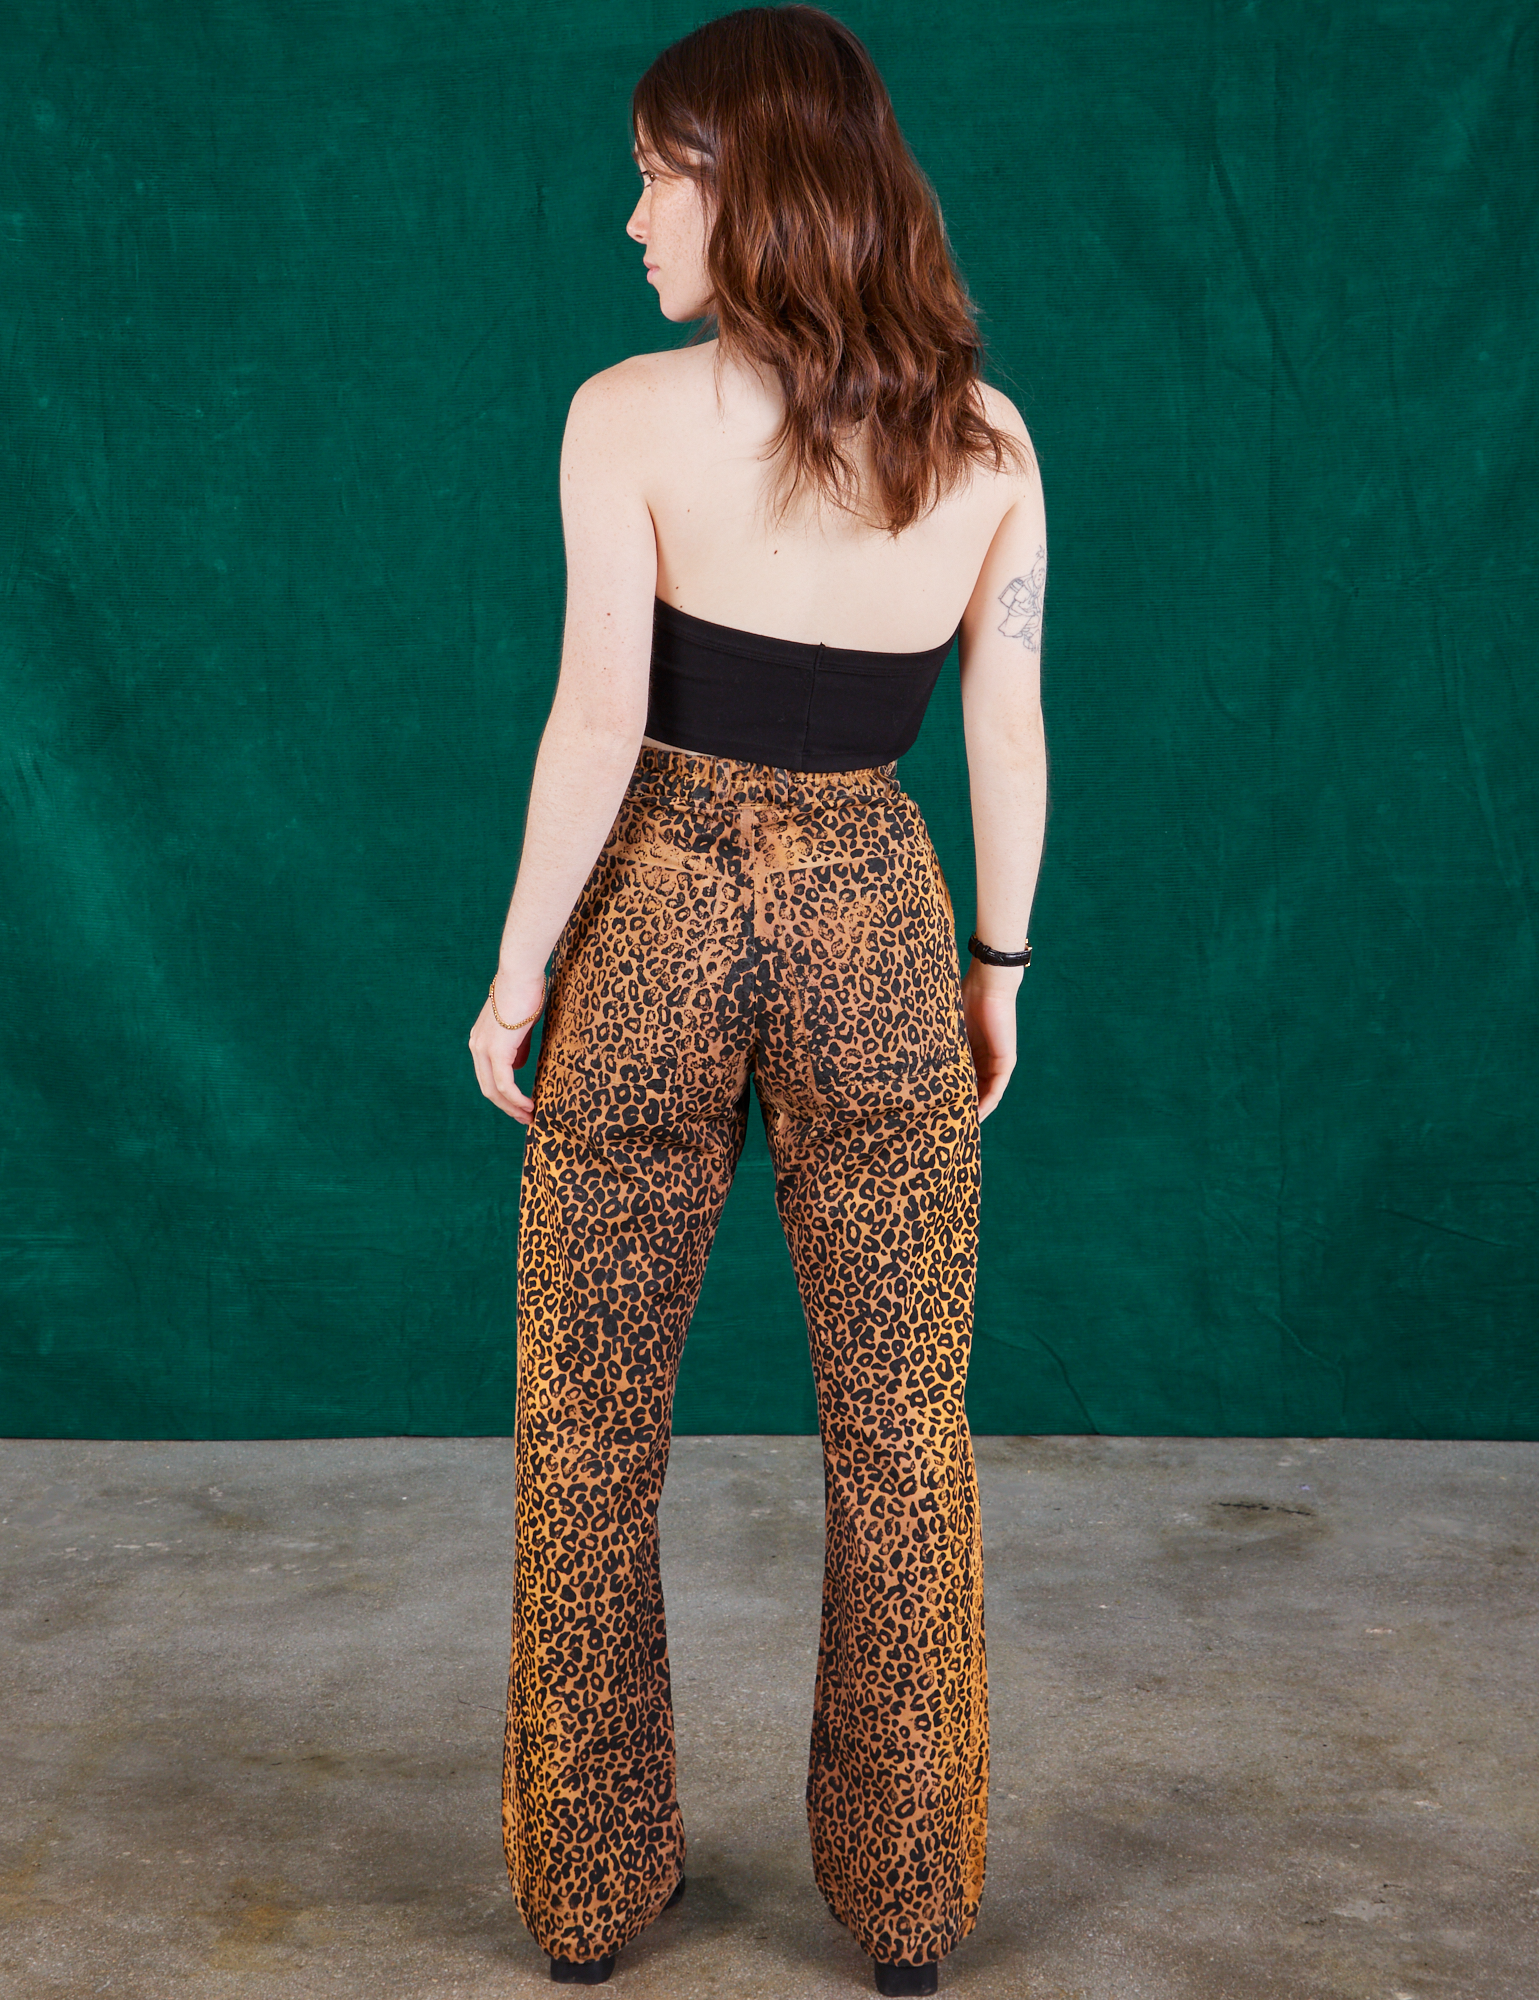 Back view of Leopard Work Pants and black Halter Top on Hana